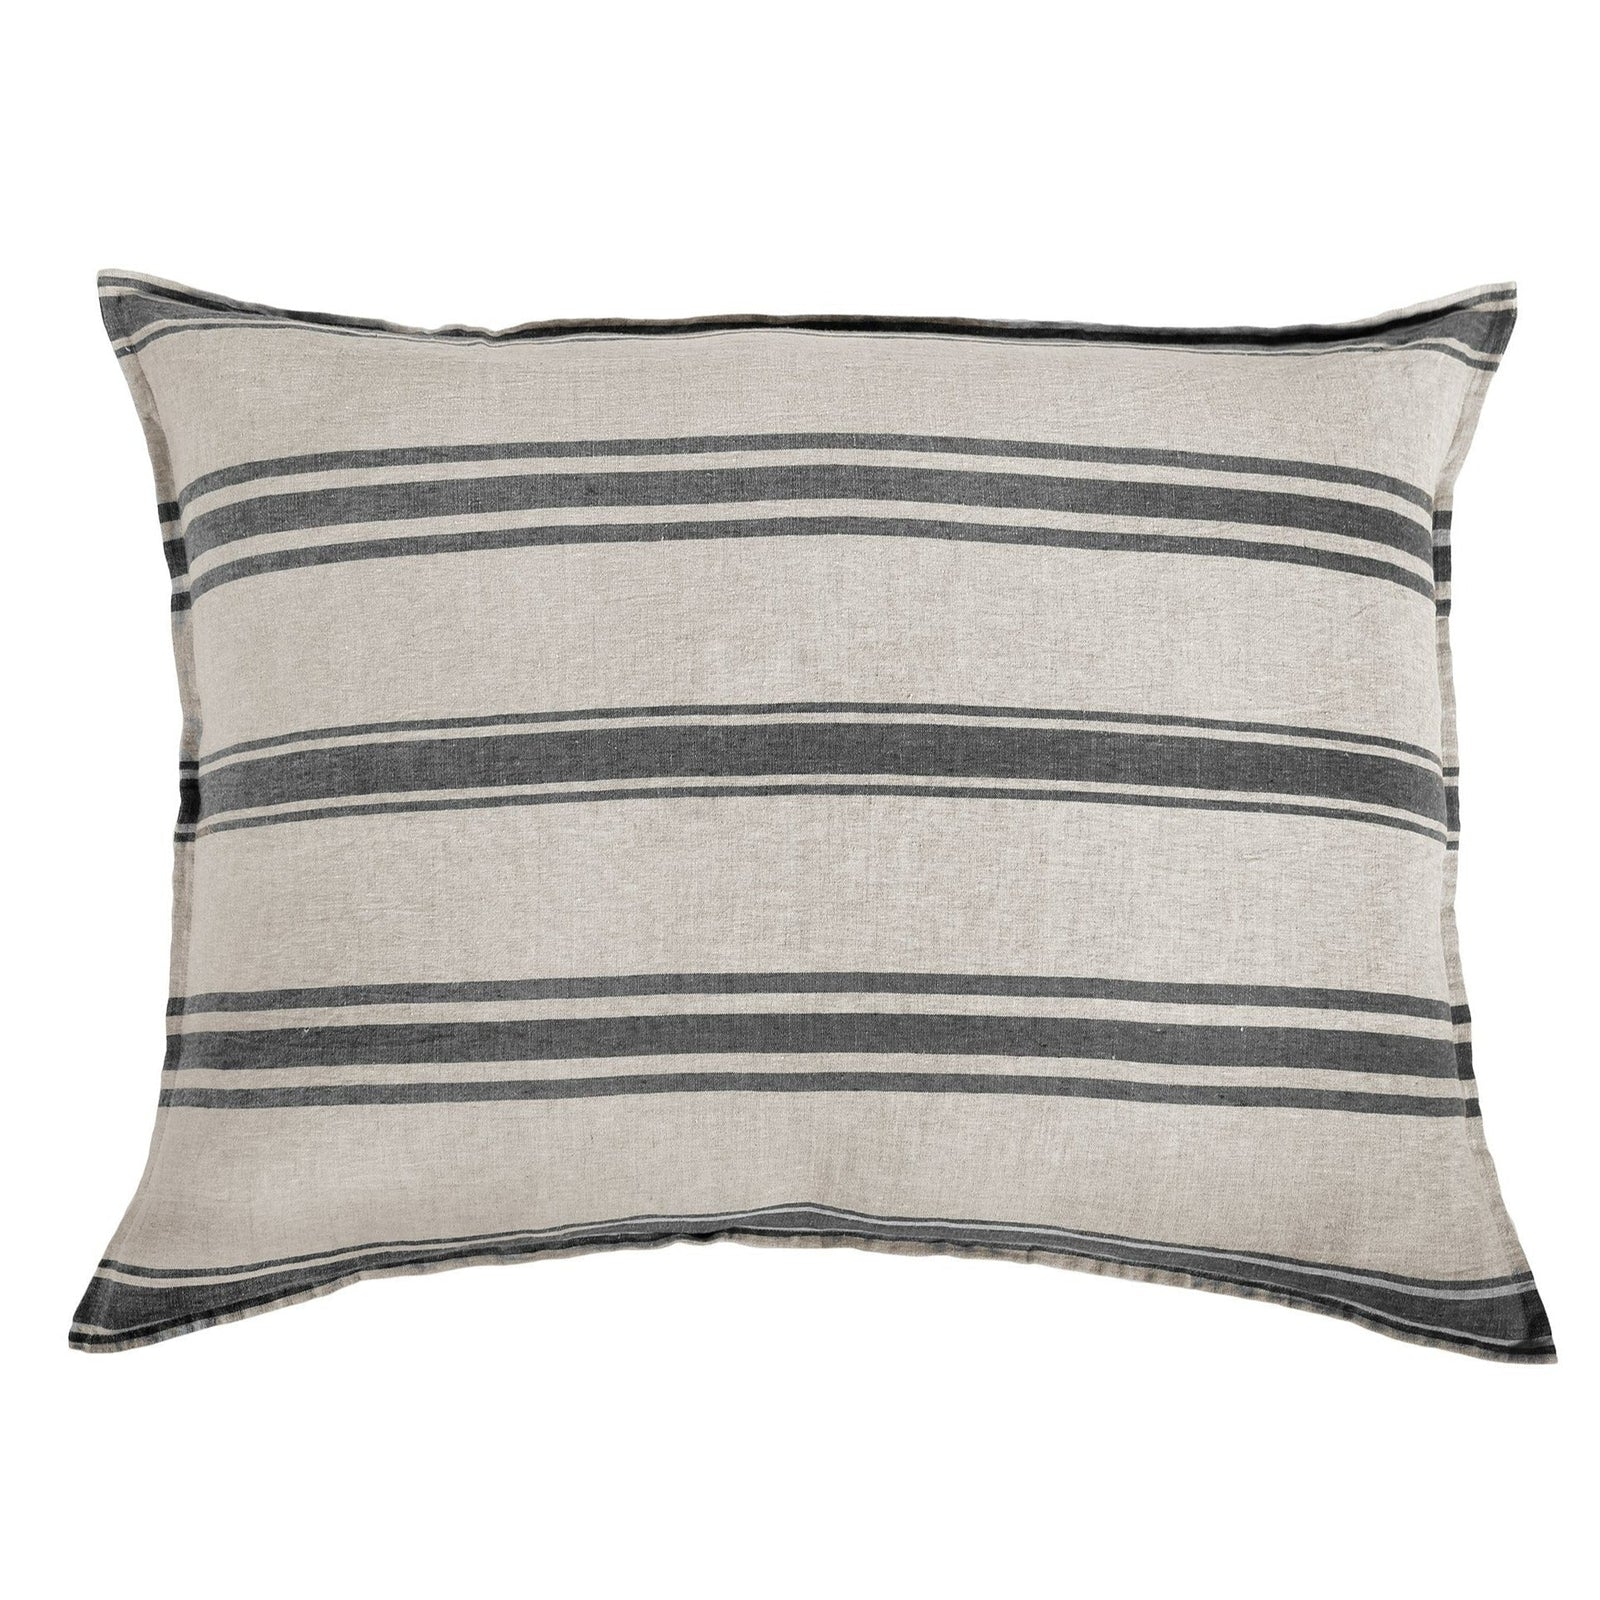 Jackson Flax/Midnight Big Pillow by Pom at Home